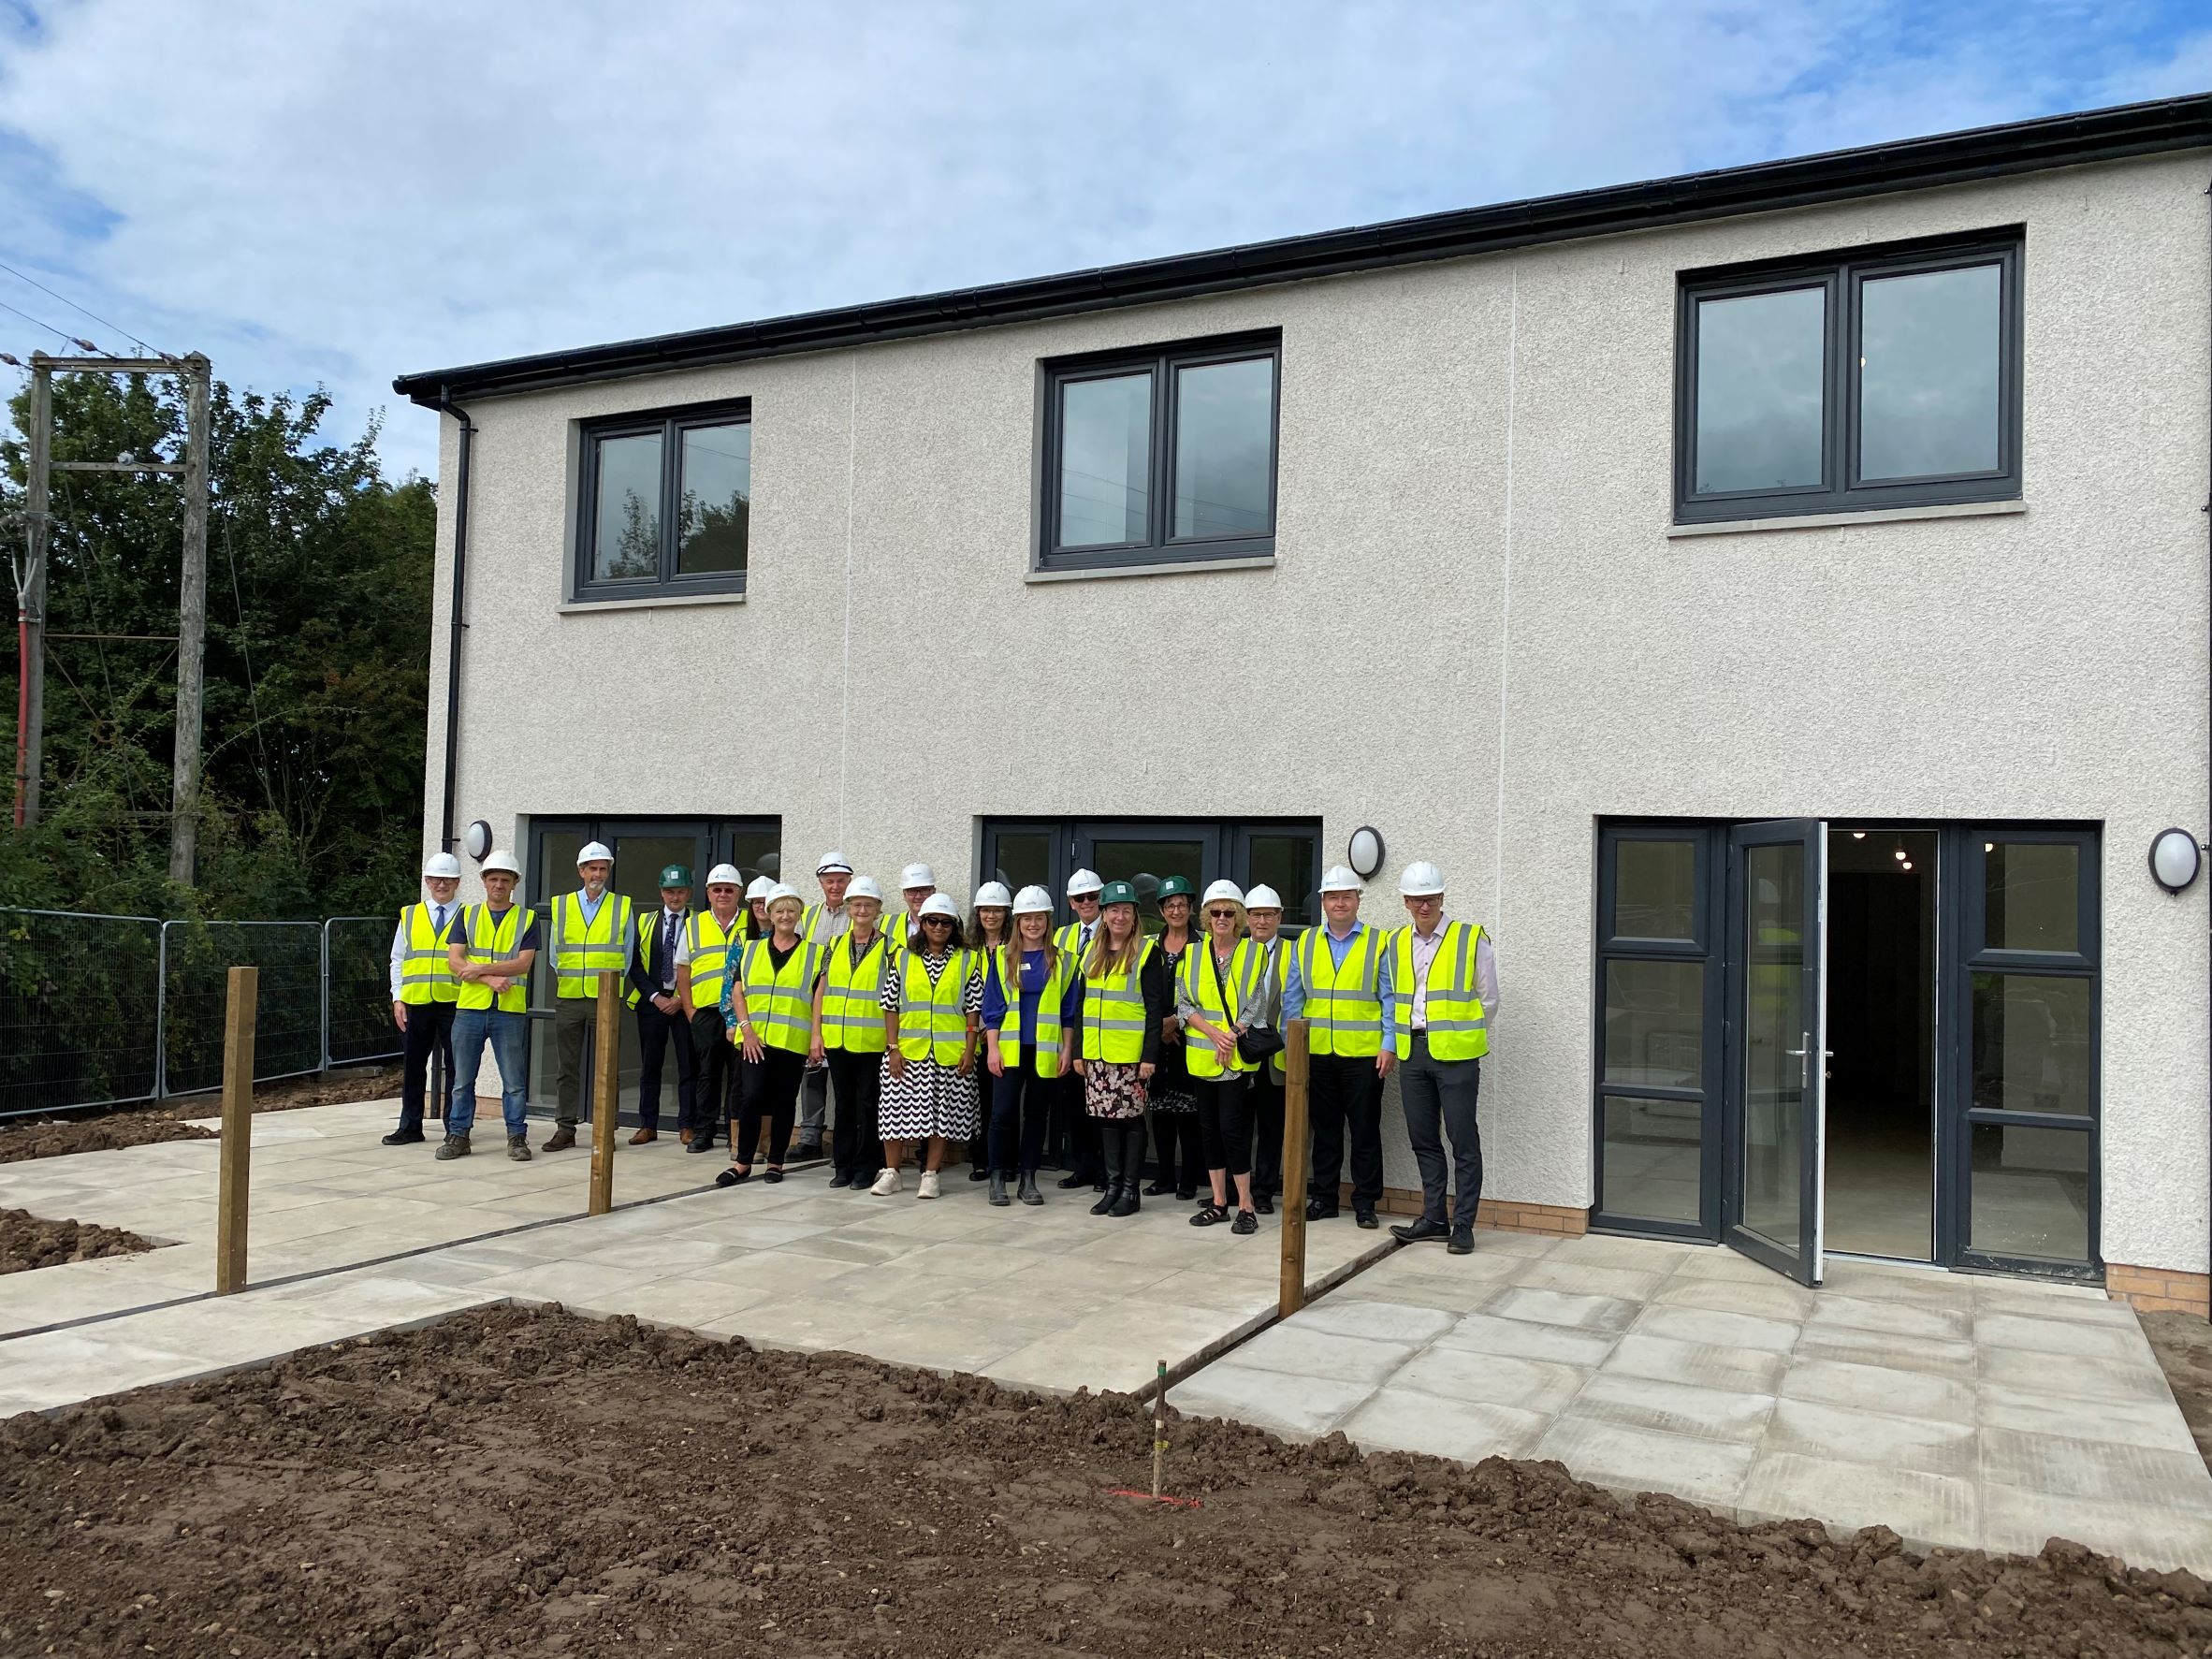 South Ayrshire modular homes on track for first tenants